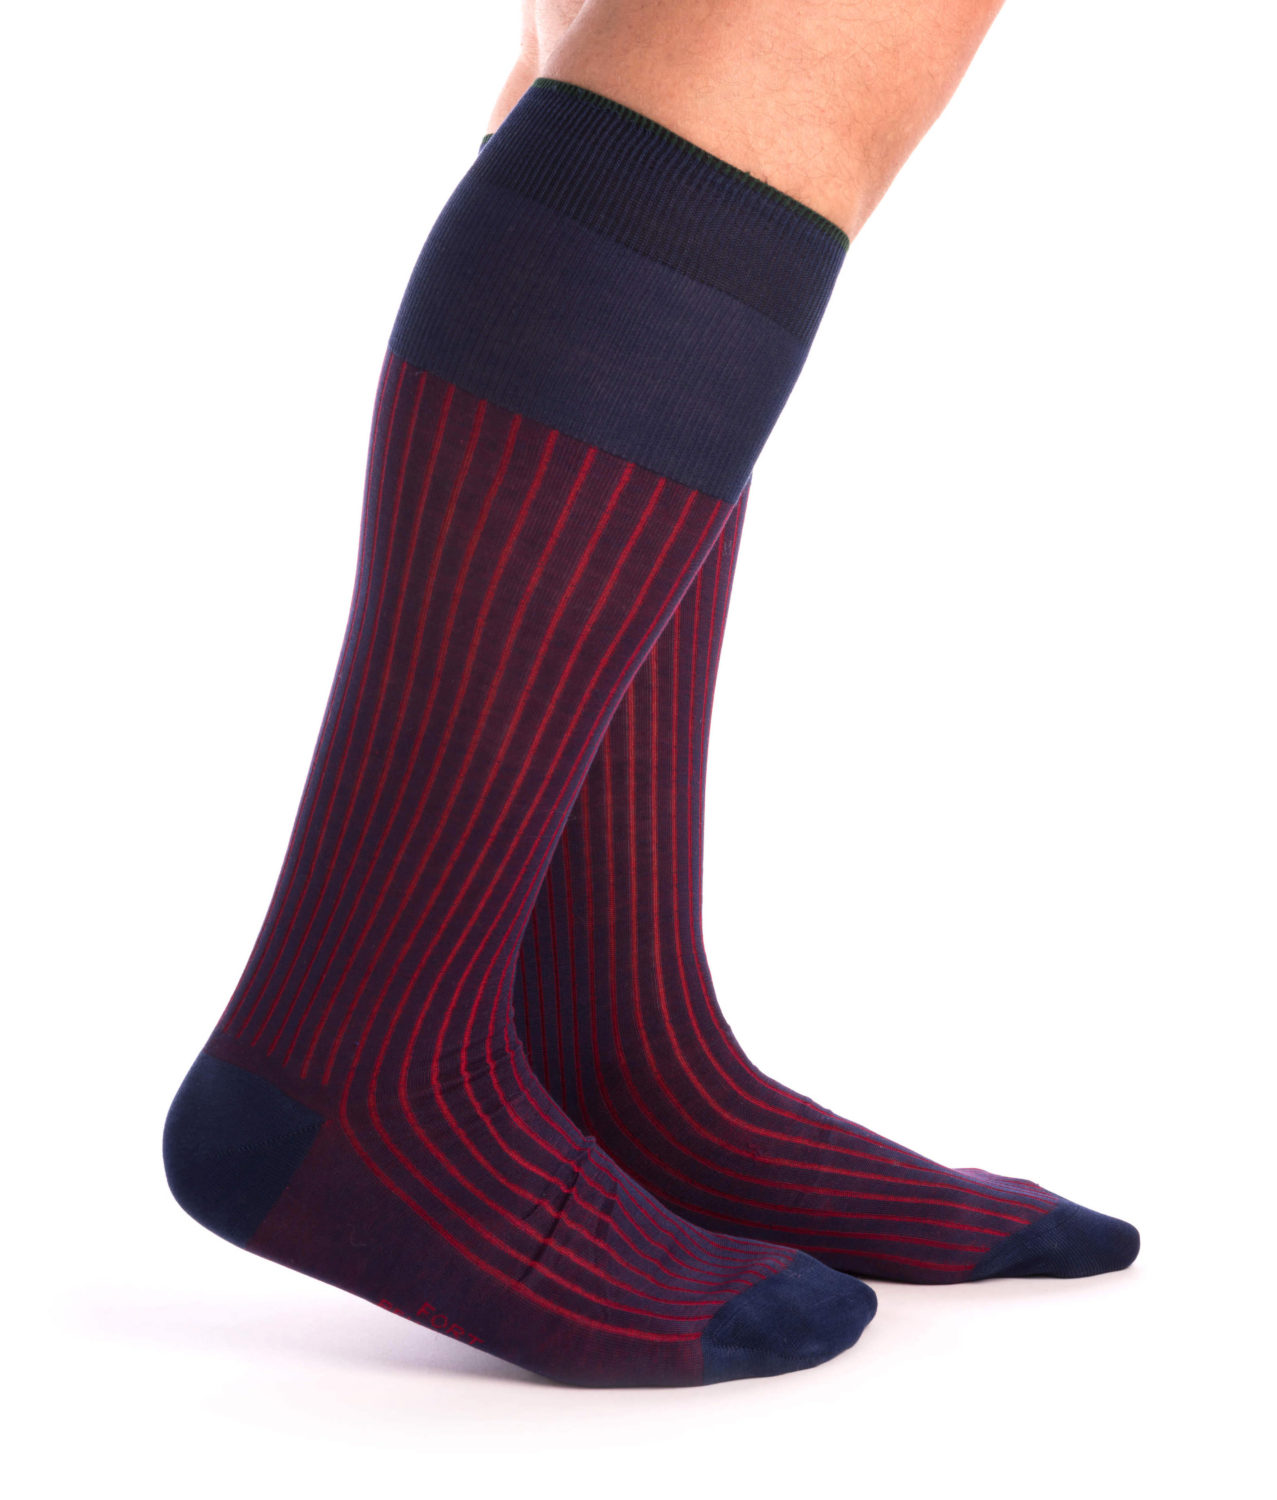 Over the calf Shadow Stripe Ribbed Socks Navy Blue & Red Fil d'Ecosse Cotton - Fort Belvedere